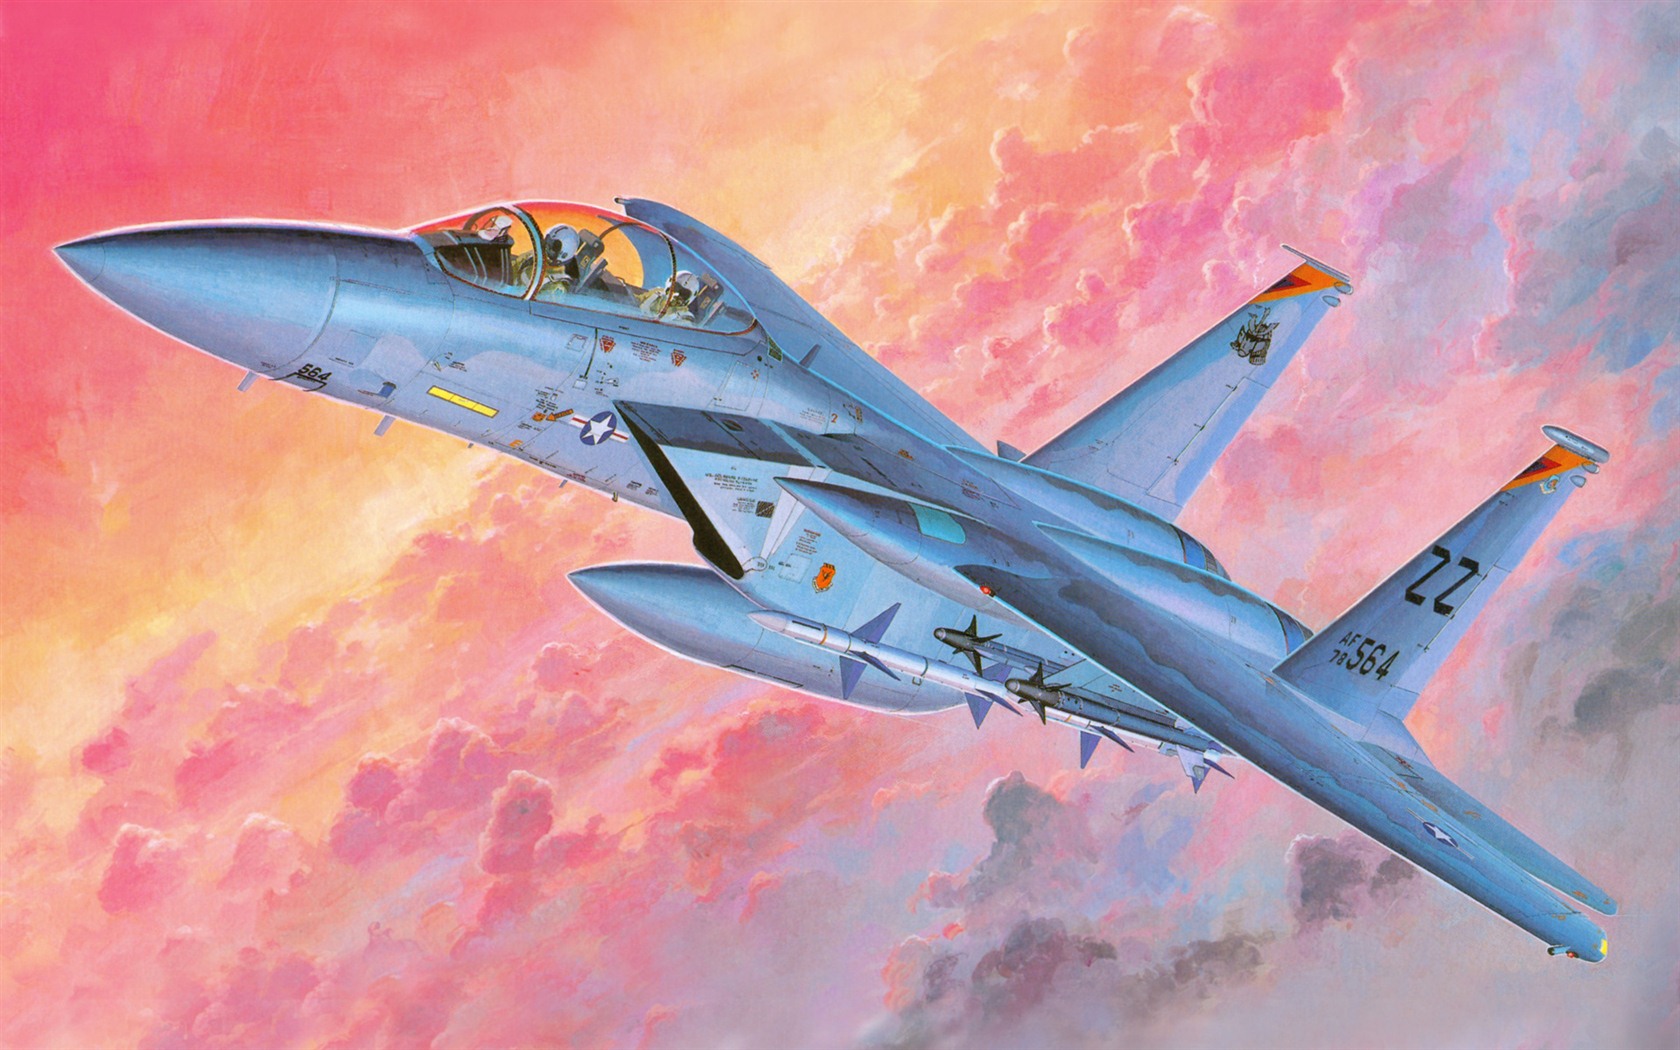 Military aircraft flight exquisite painting wallpapers #15 - 1680x1050